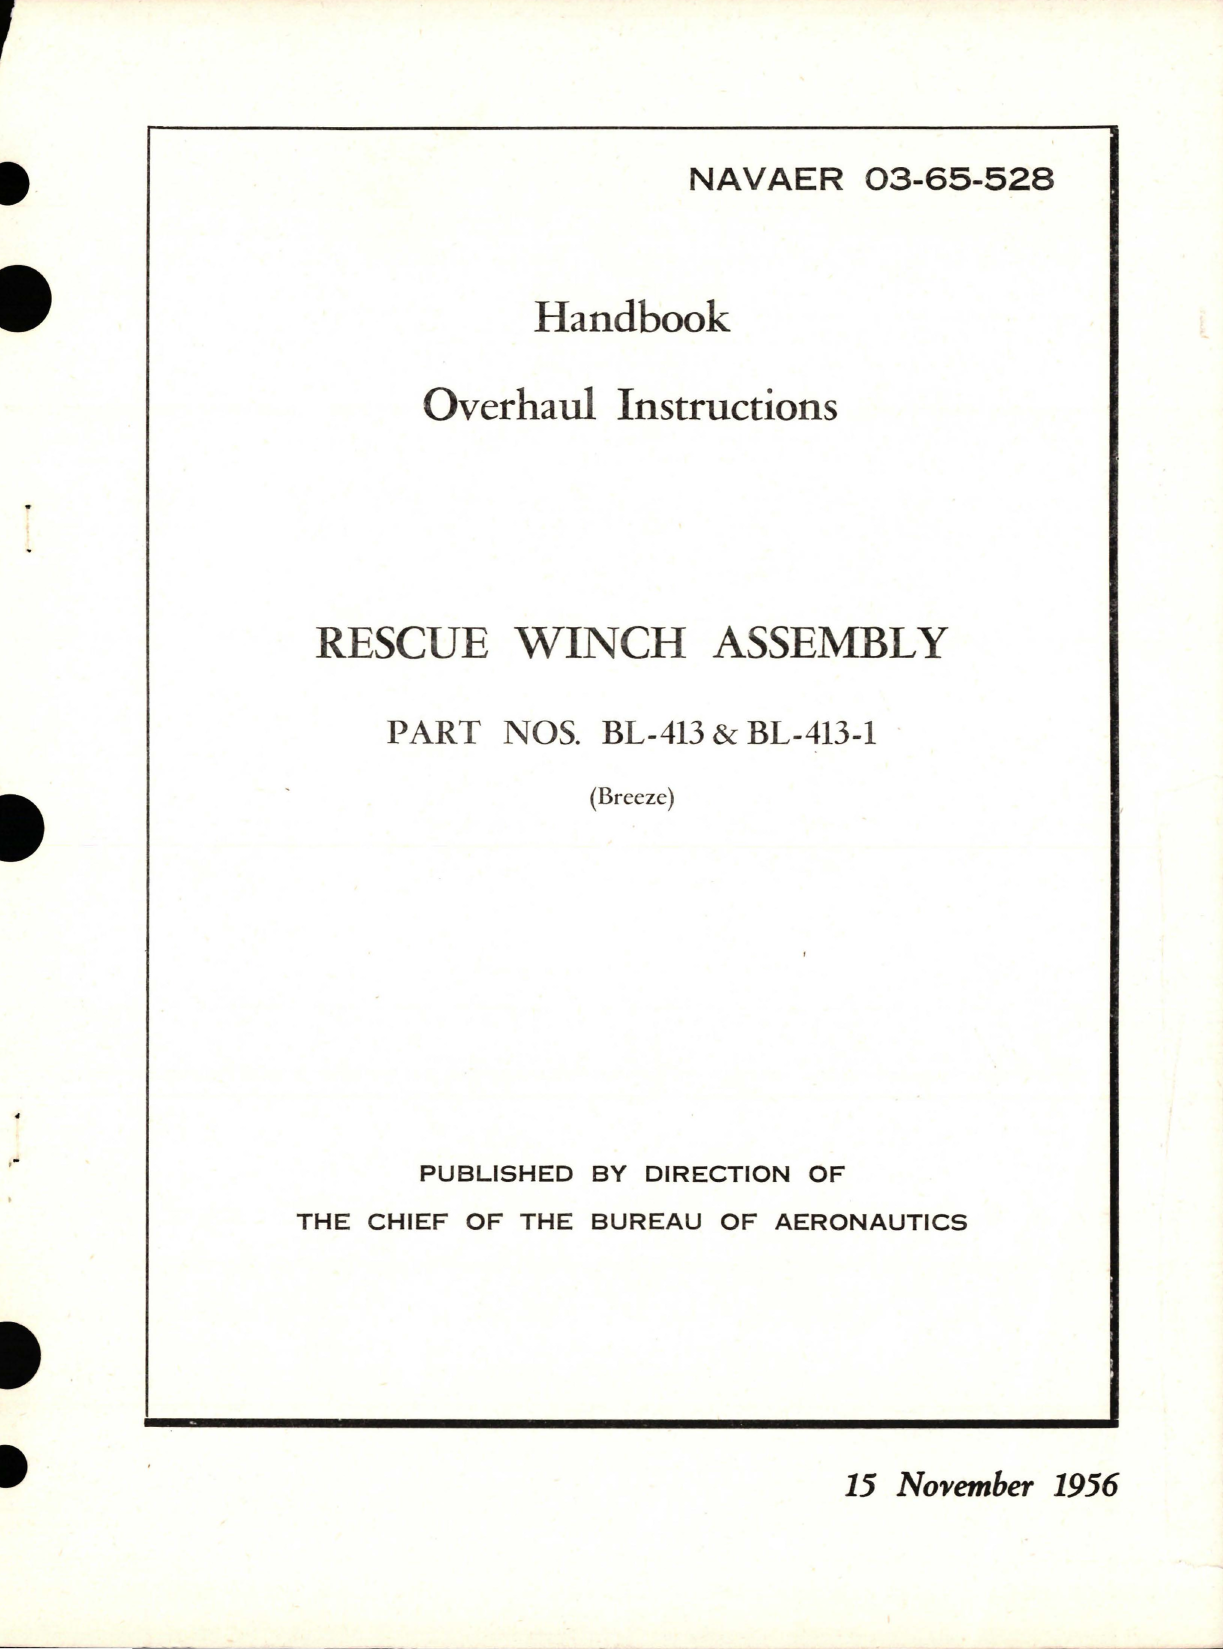 Sample page 1 from AirCorps Library document: Overhaul Instructions for Rescue Winch Assembly - Parts BL-413 and BL-413-1 